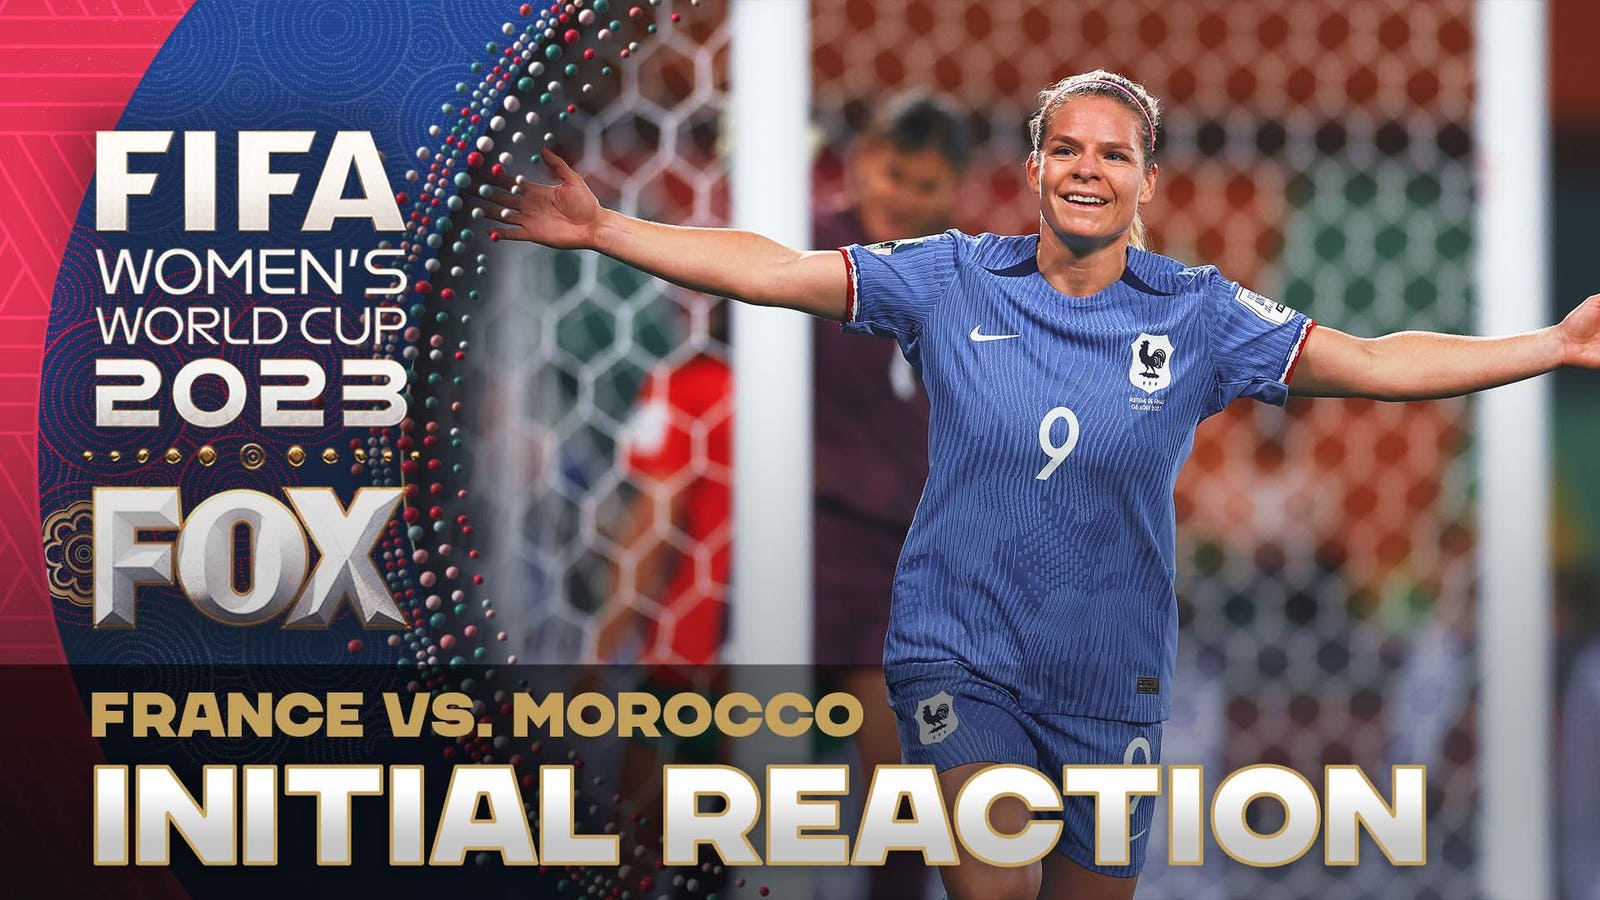 The World Cup crew discusses France's overwhelming 4-0 victory over Morocco in the Round of 16